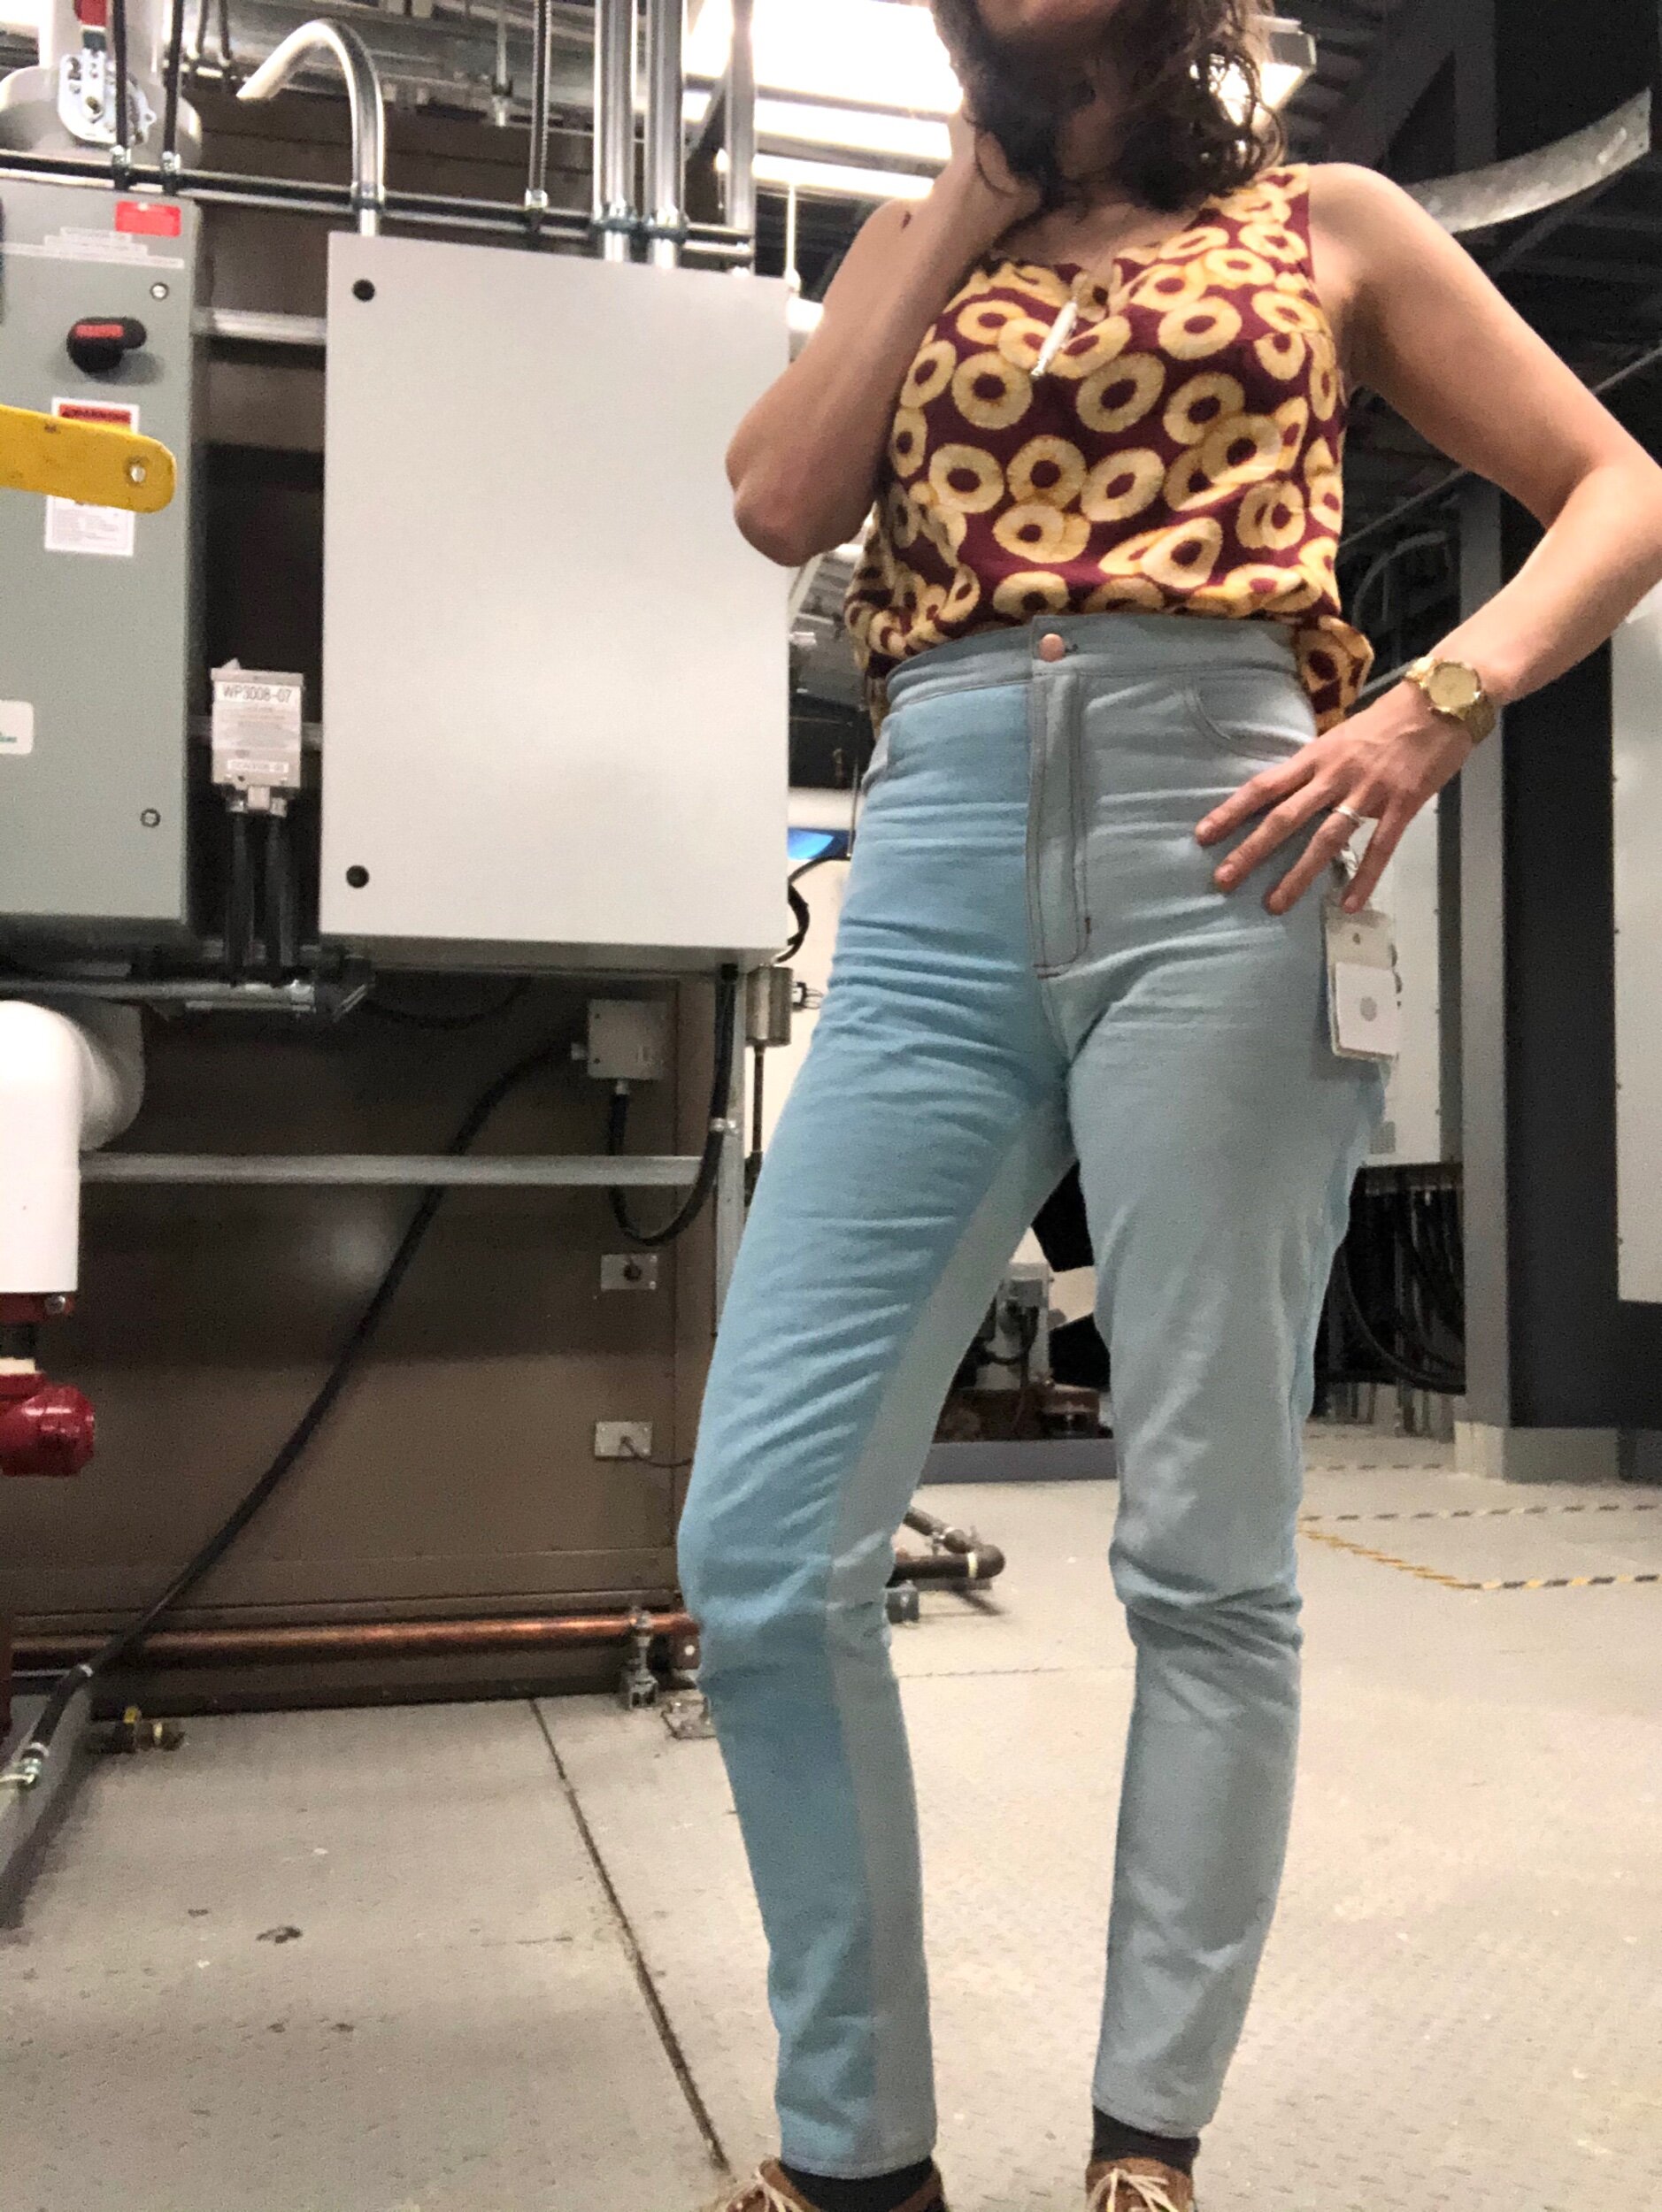 Anna Allen Clothing Blog: Straight Leg Philippa Pants Tutorial (with free  sailor jeans pockets pattern)